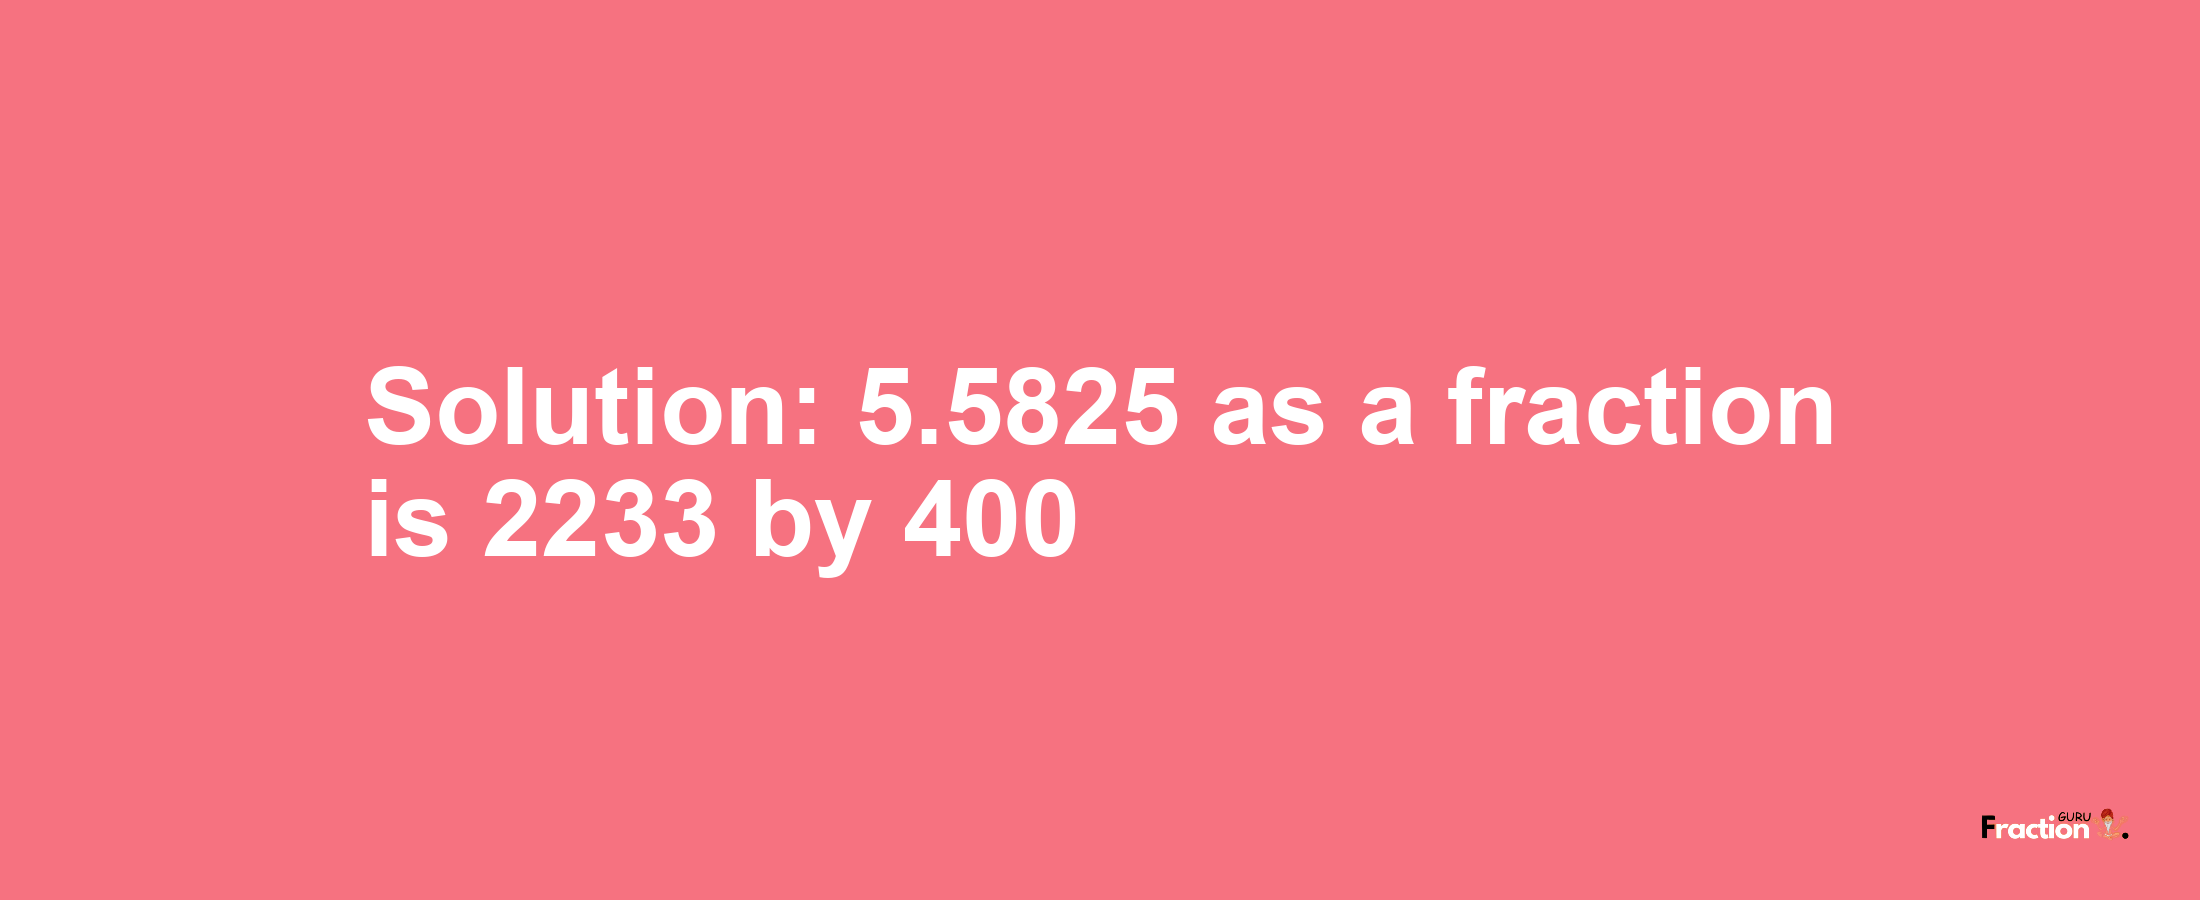 Solution:5.5825 as a fraction is 2233/400